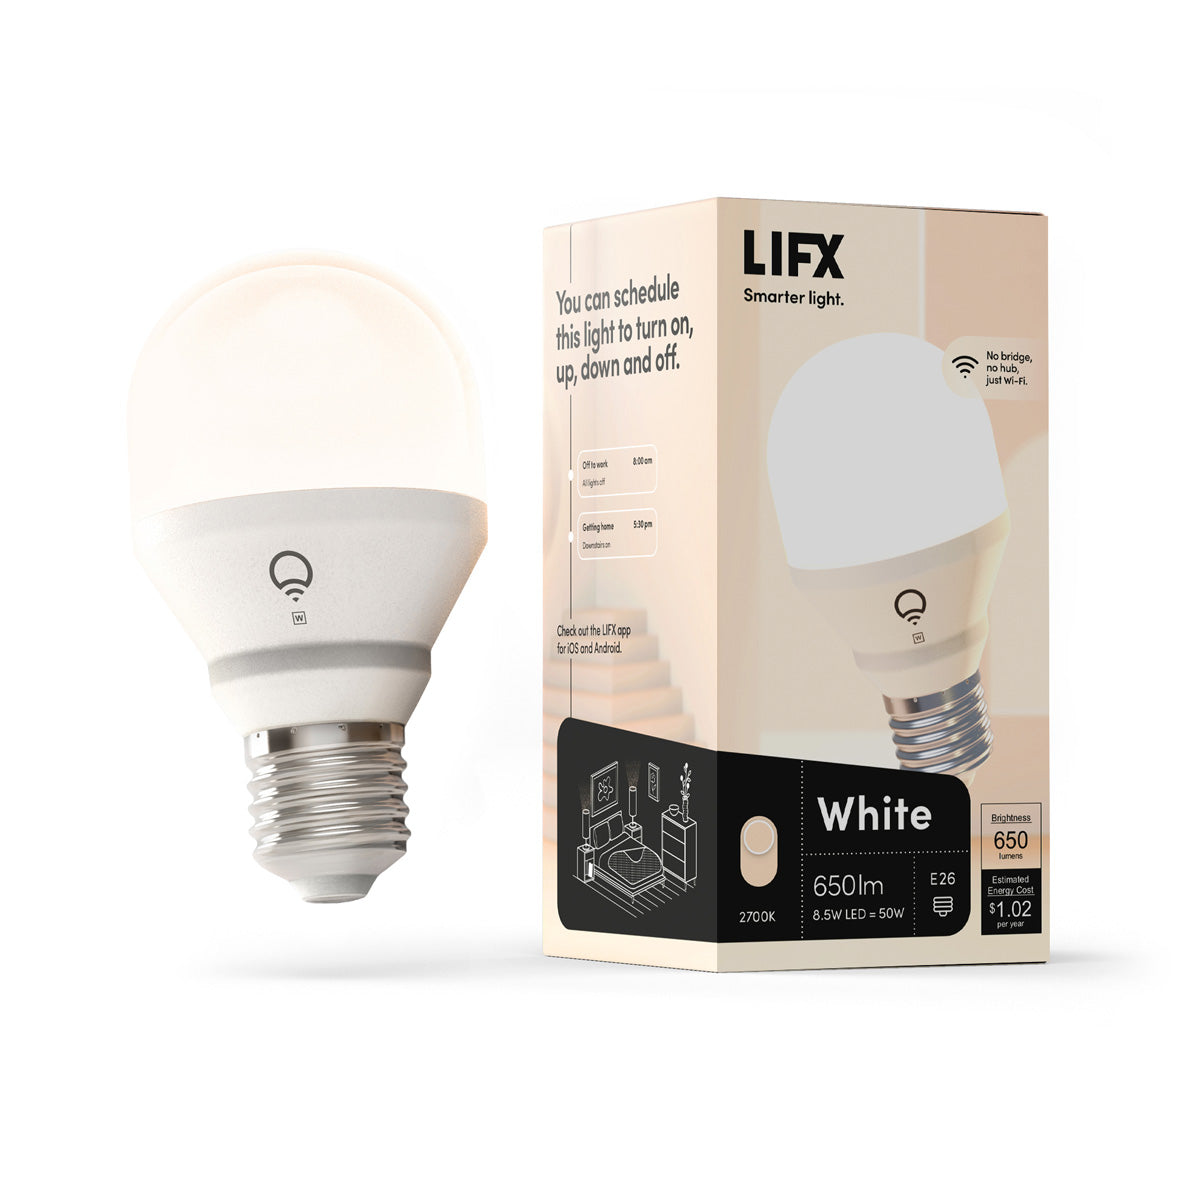 How to Reconnect Lifx Bulb: Troubleshooting Tips